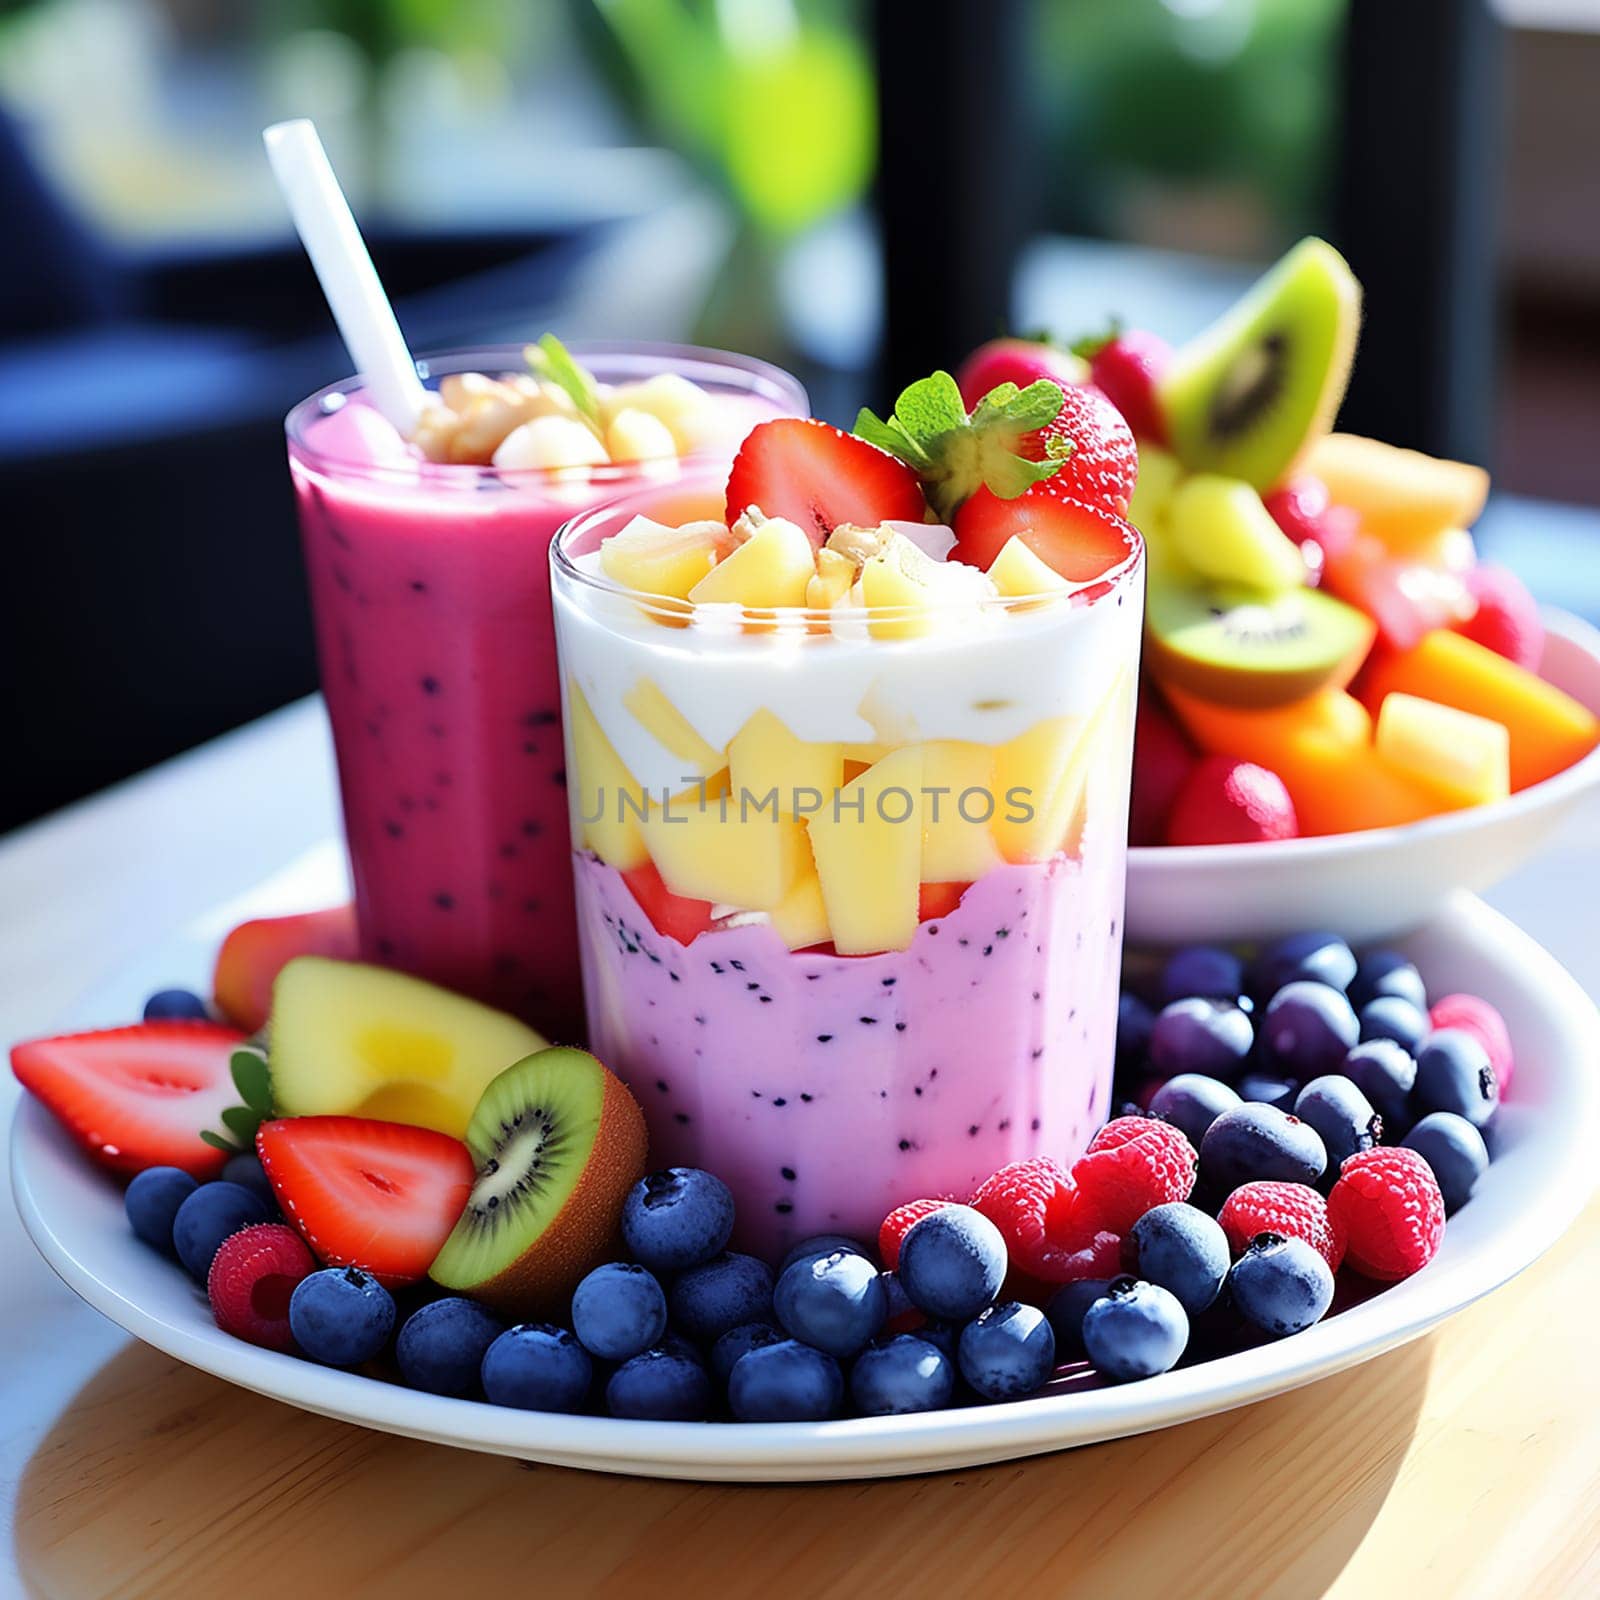 Fruit Fusion: Vibrant Salad and Smoothie Combinations by Petrichor